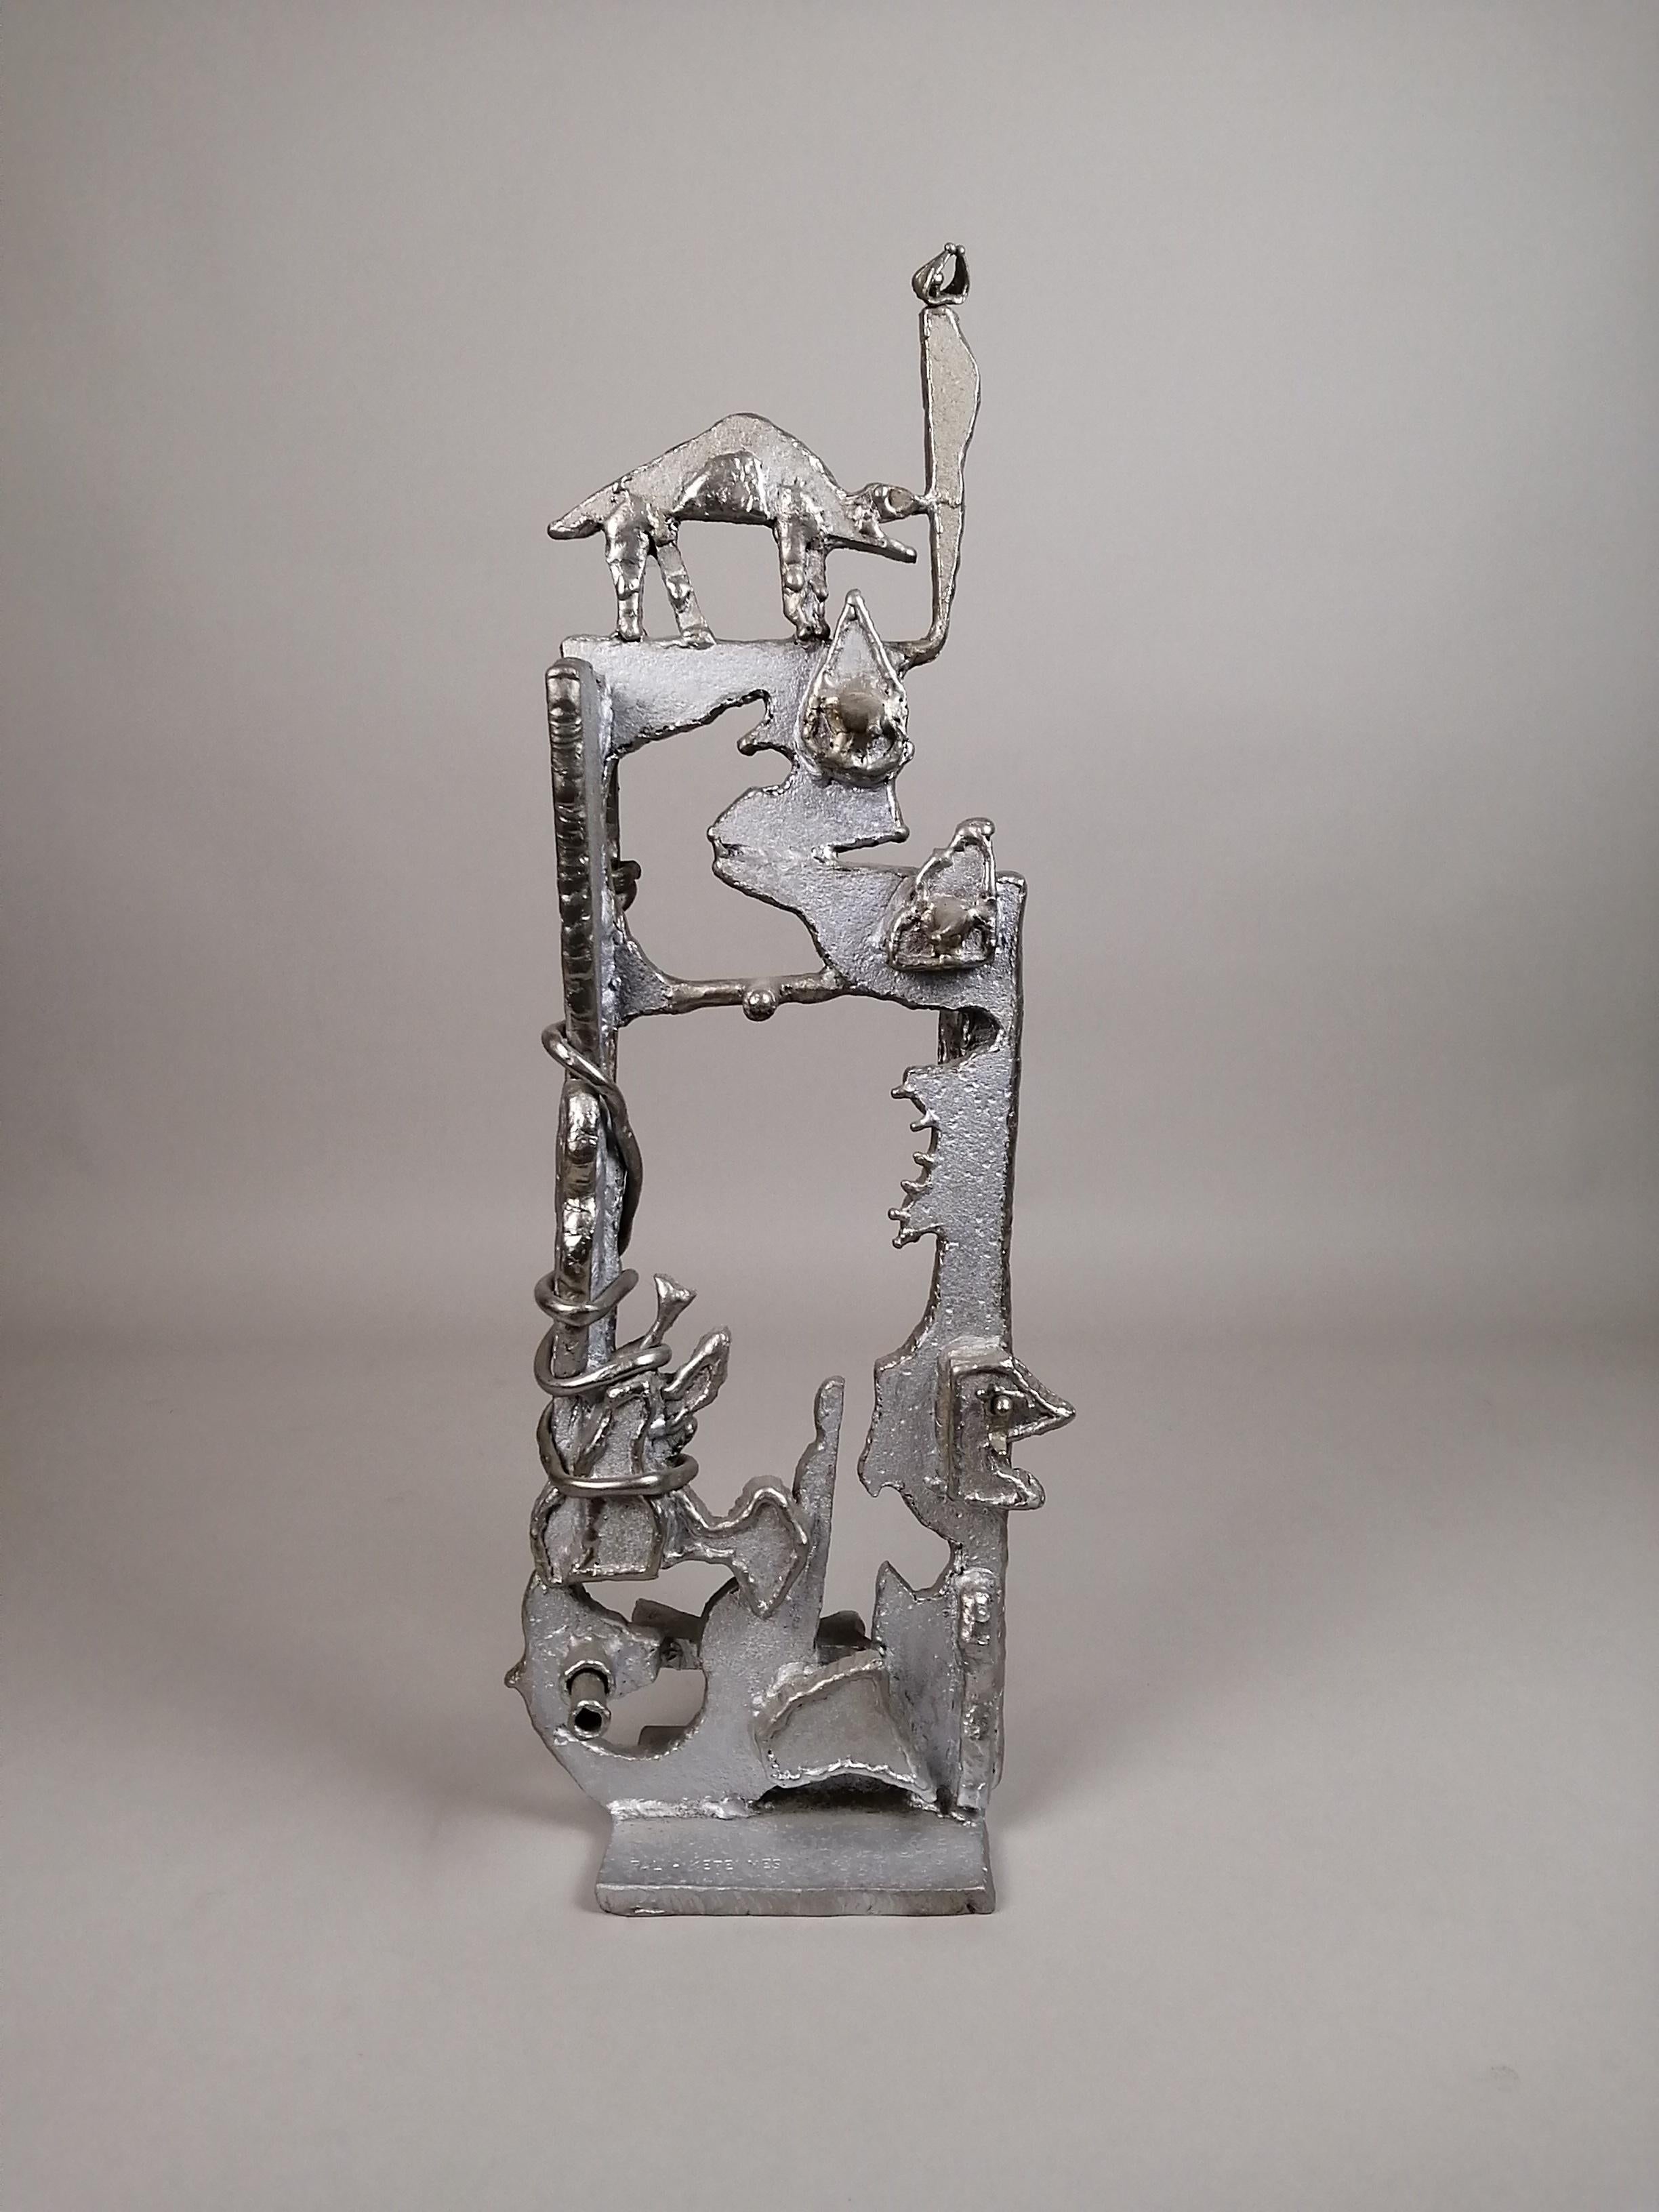 Very rare Brutalist steel sculpture by Pal Kepenyes. Signed on base.

A sculptor from Hungary who was nationalized Mexican, Pal Kepenyes resided in Acapulco where he had a studio. In his sculptures we can appreciate romantic, ludic and social